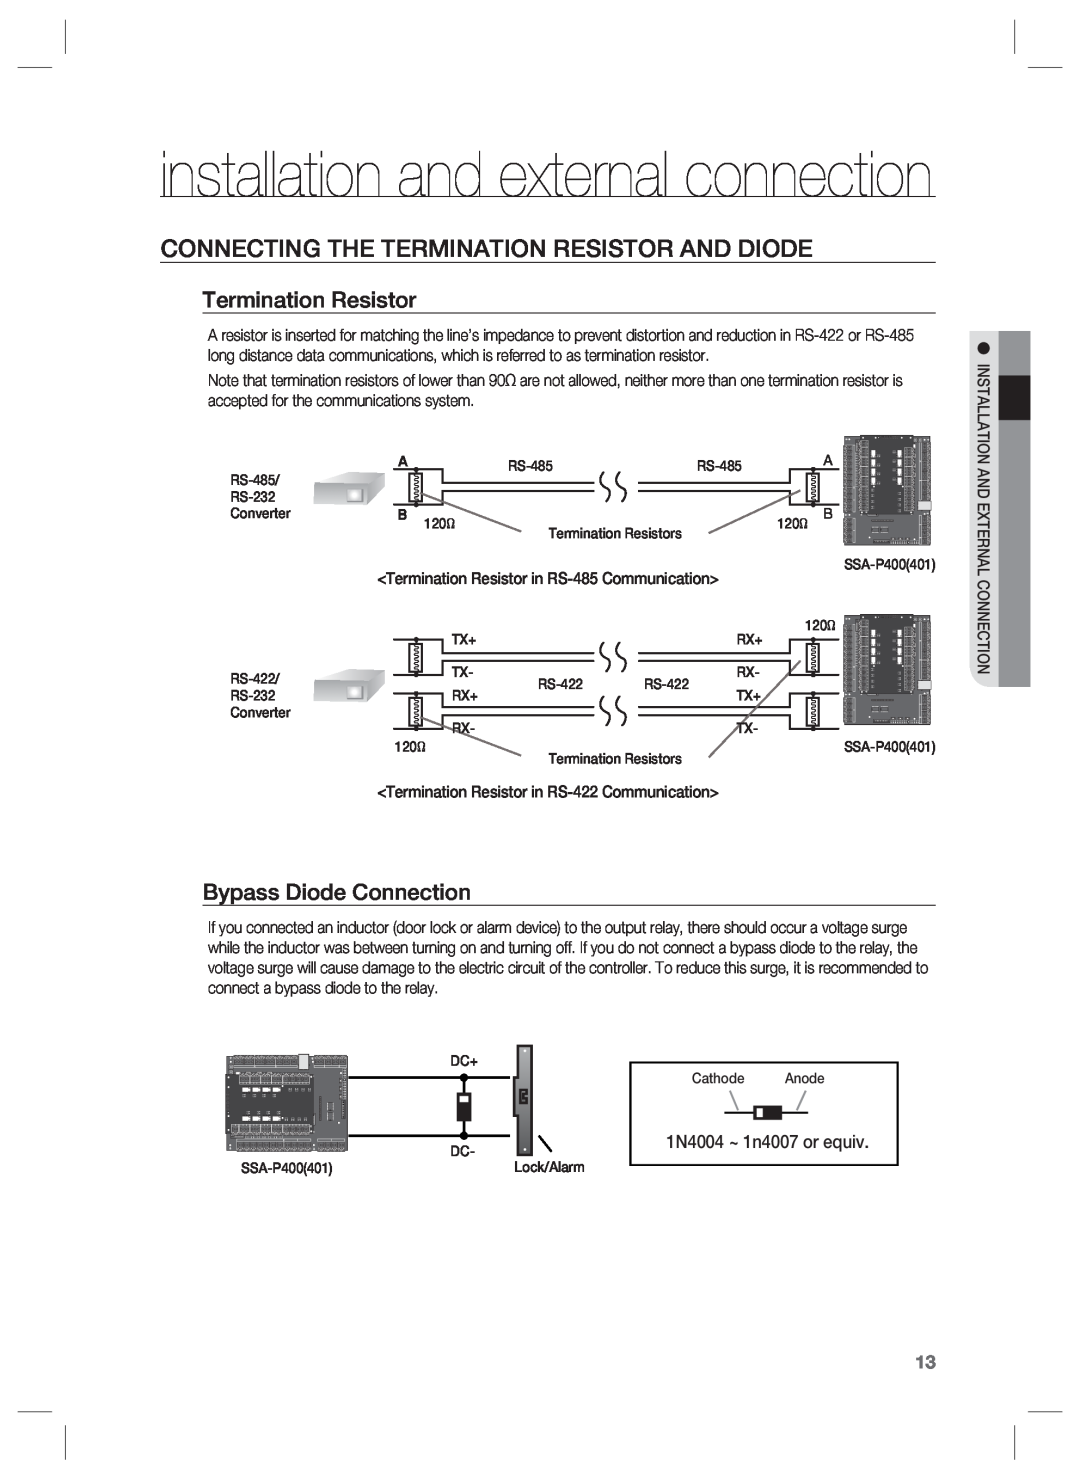 Samsung SSA-P401T, SSA-P400T user manual installation and external connection, Connecting The Termination Resistor And Diode 